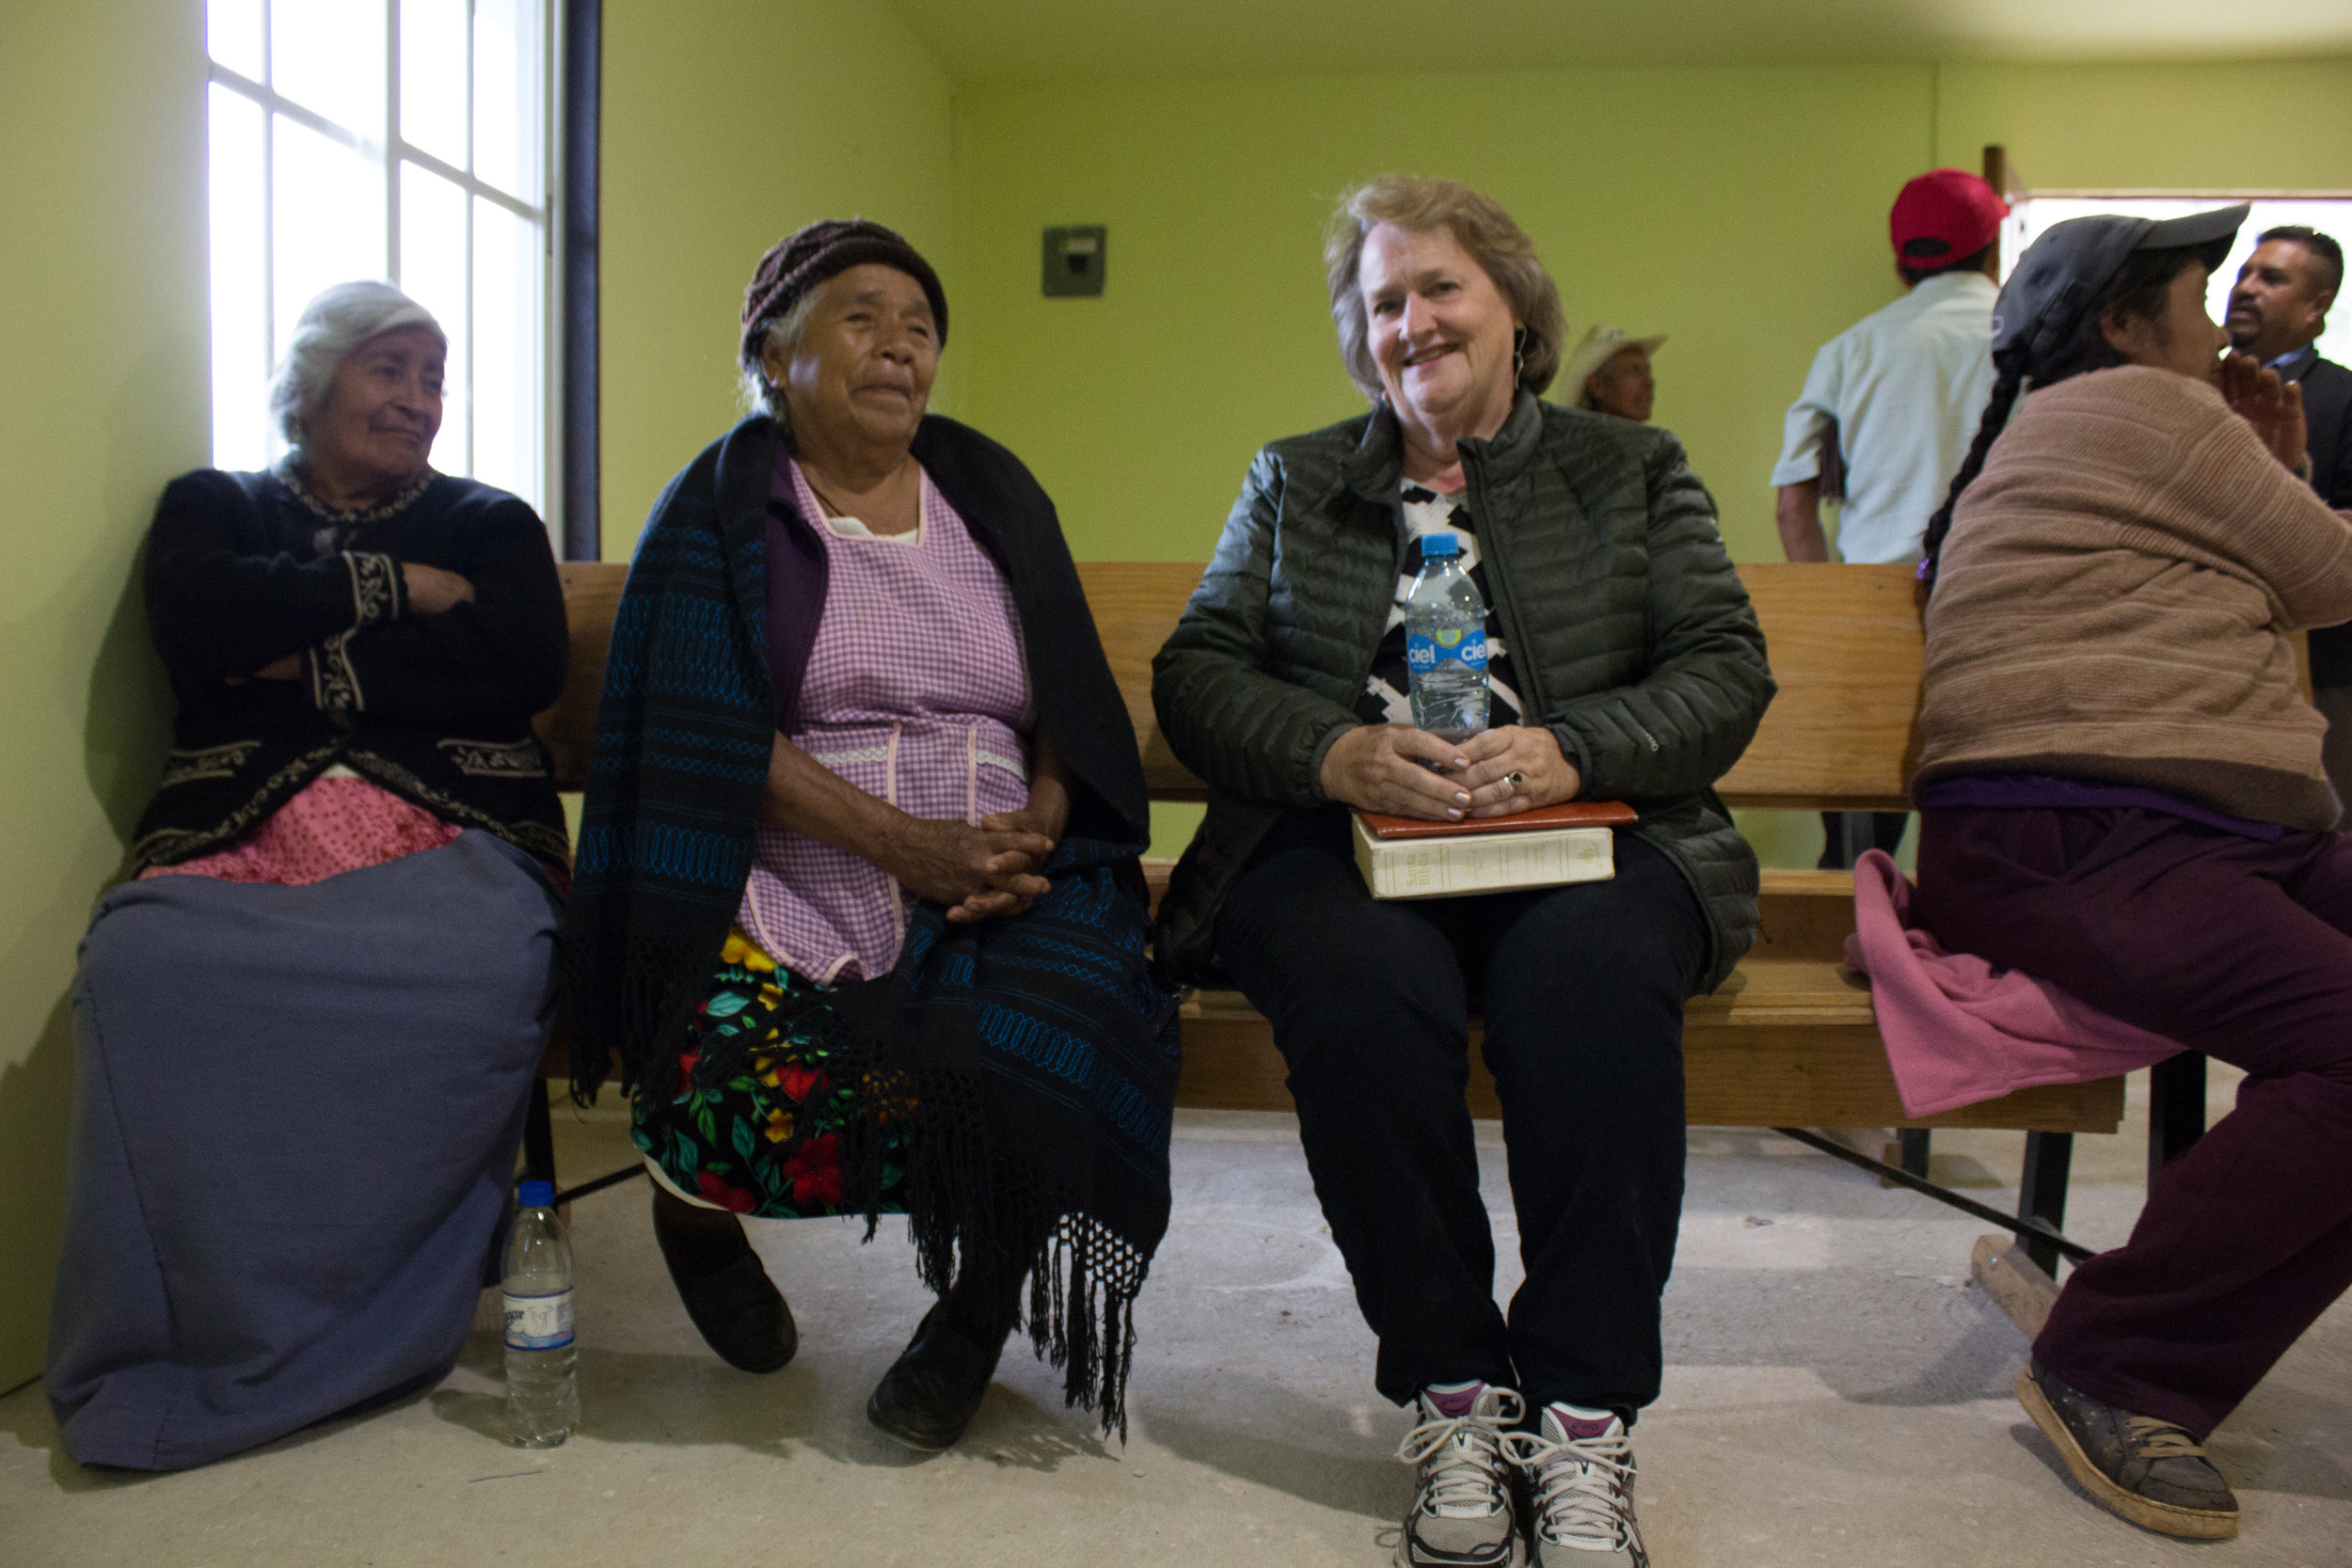  Ilene brings medicine and other items on her trips. She has met many people over the years, such as these women, and is familiar with their needs. 